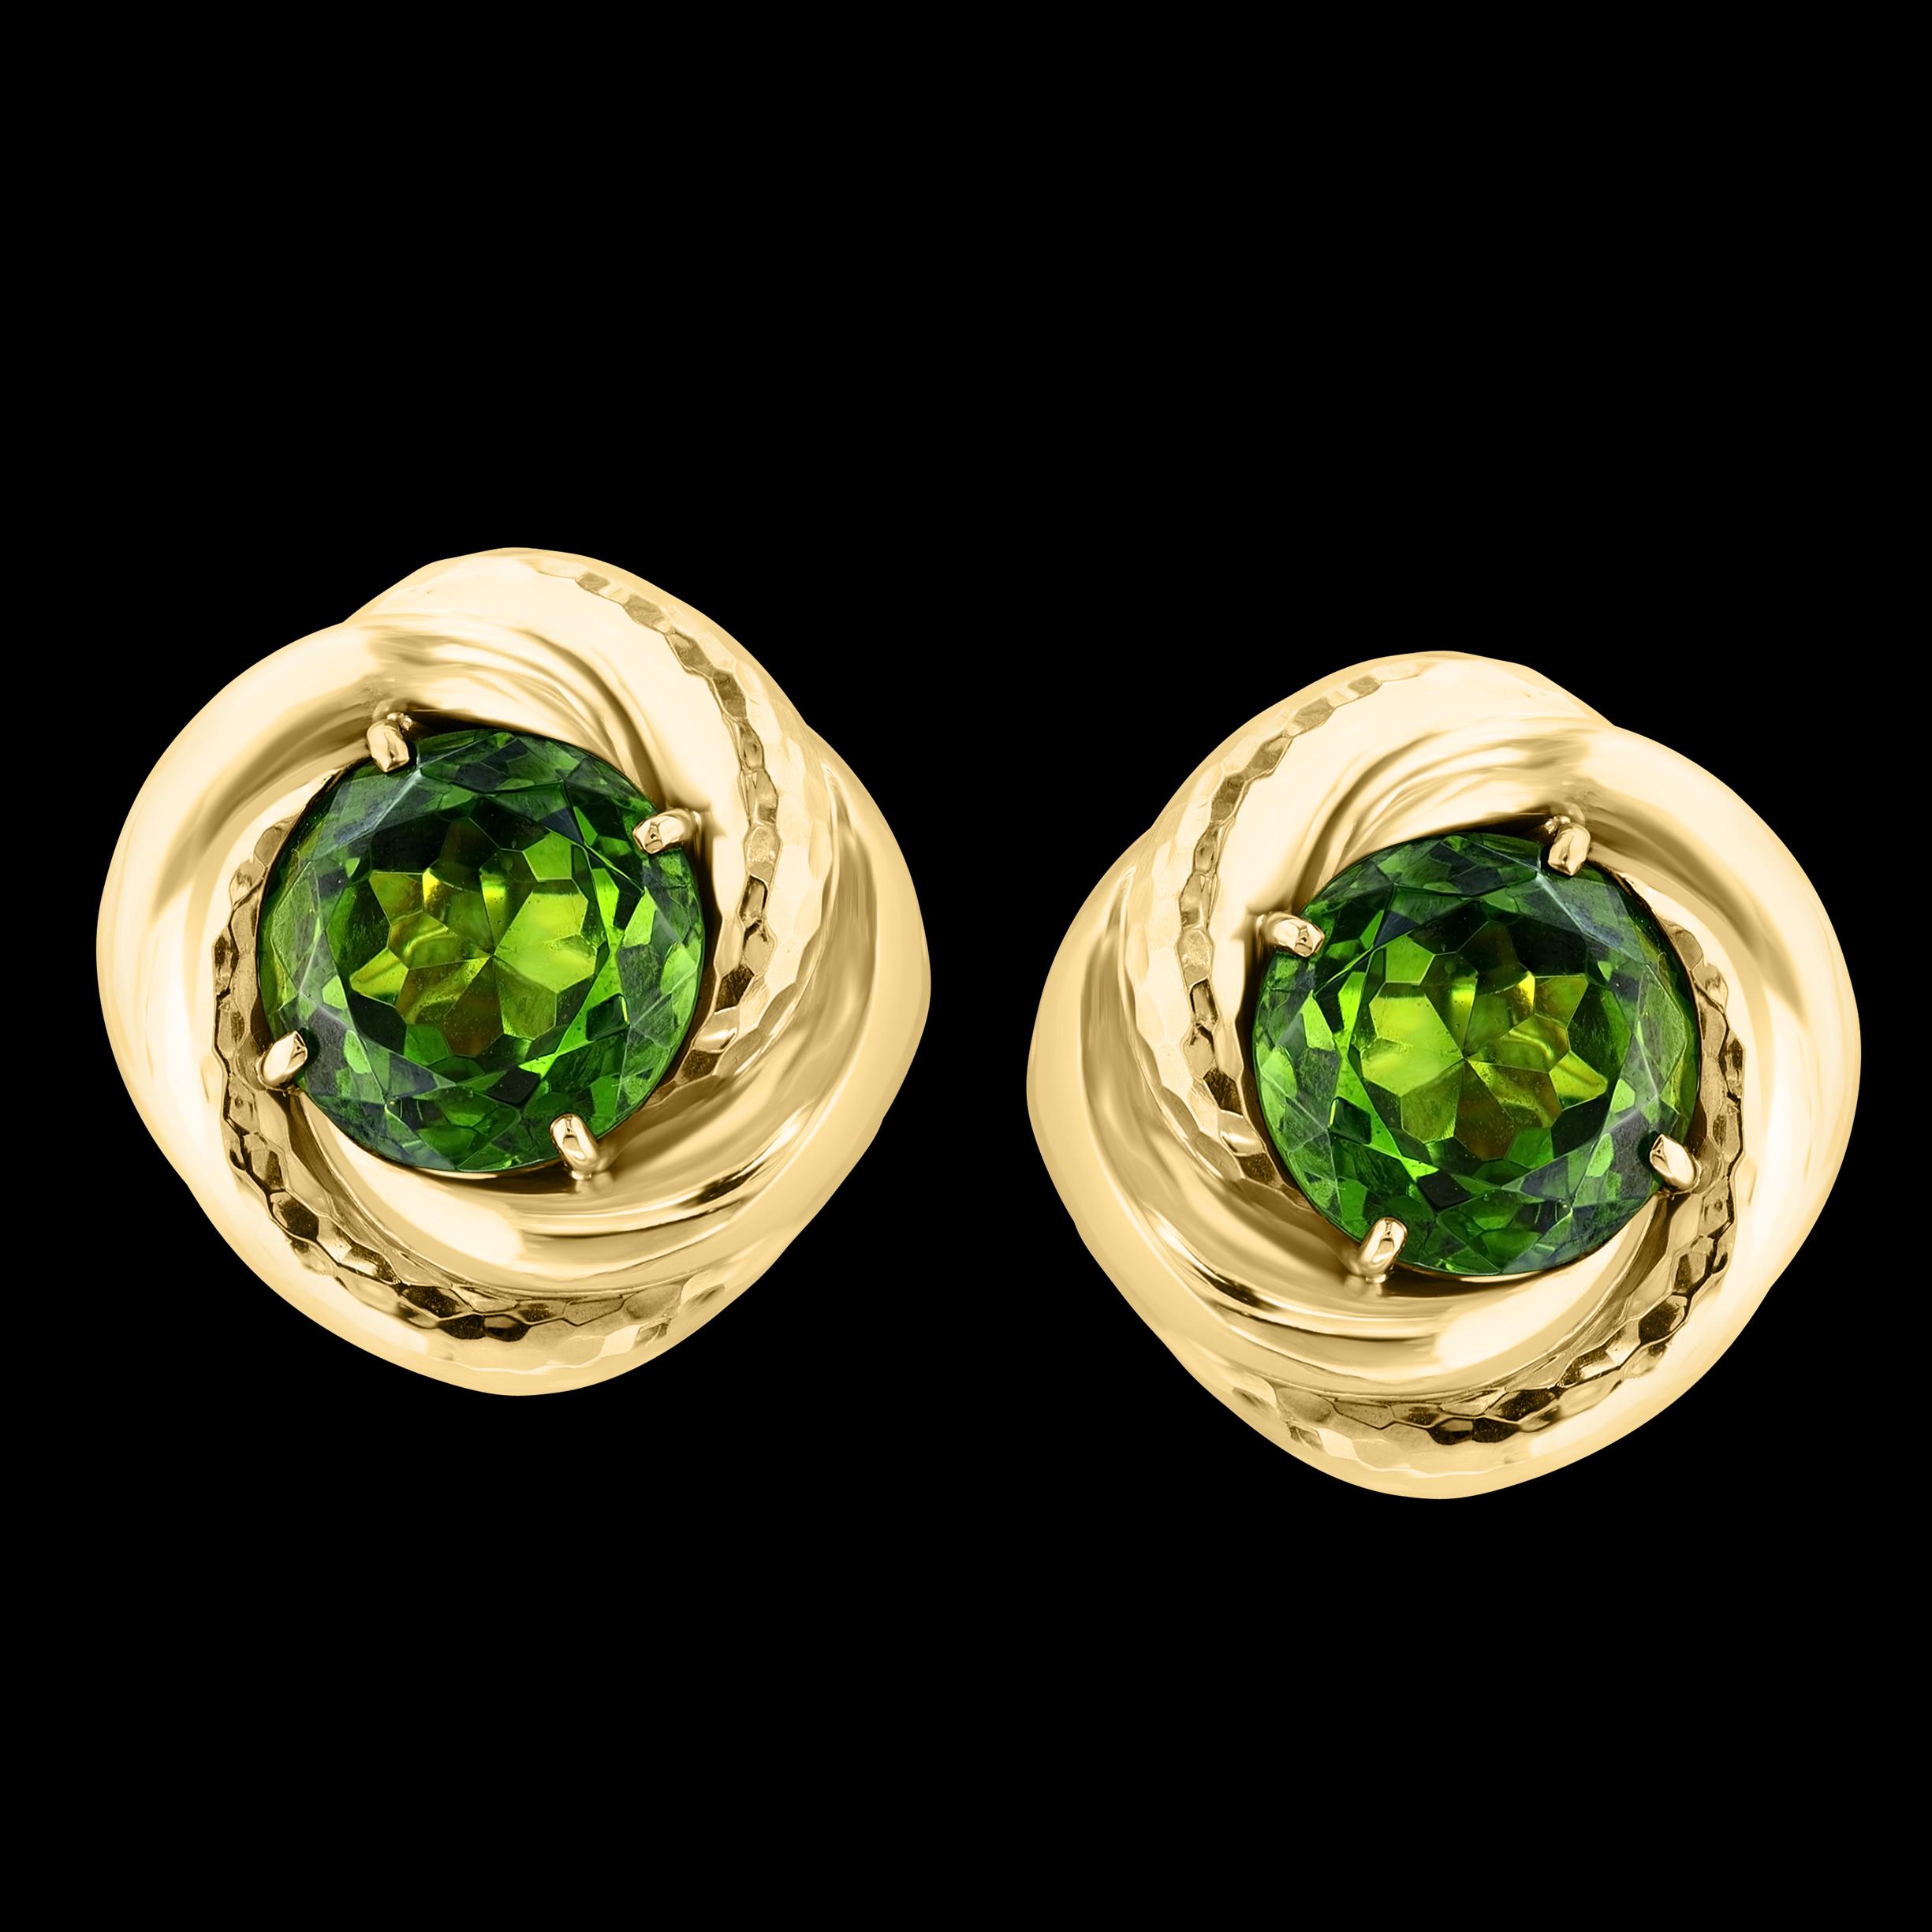 Approximately 30 Ct Natural Round Peridot Earrings by Designer Andrew Clunn in 18 Karat Hammered Gold. Clip-ons
The earrings are perfectly crafted from hammered gold with a honeycomb pattern.
Super large and super nice quality of peridot
This